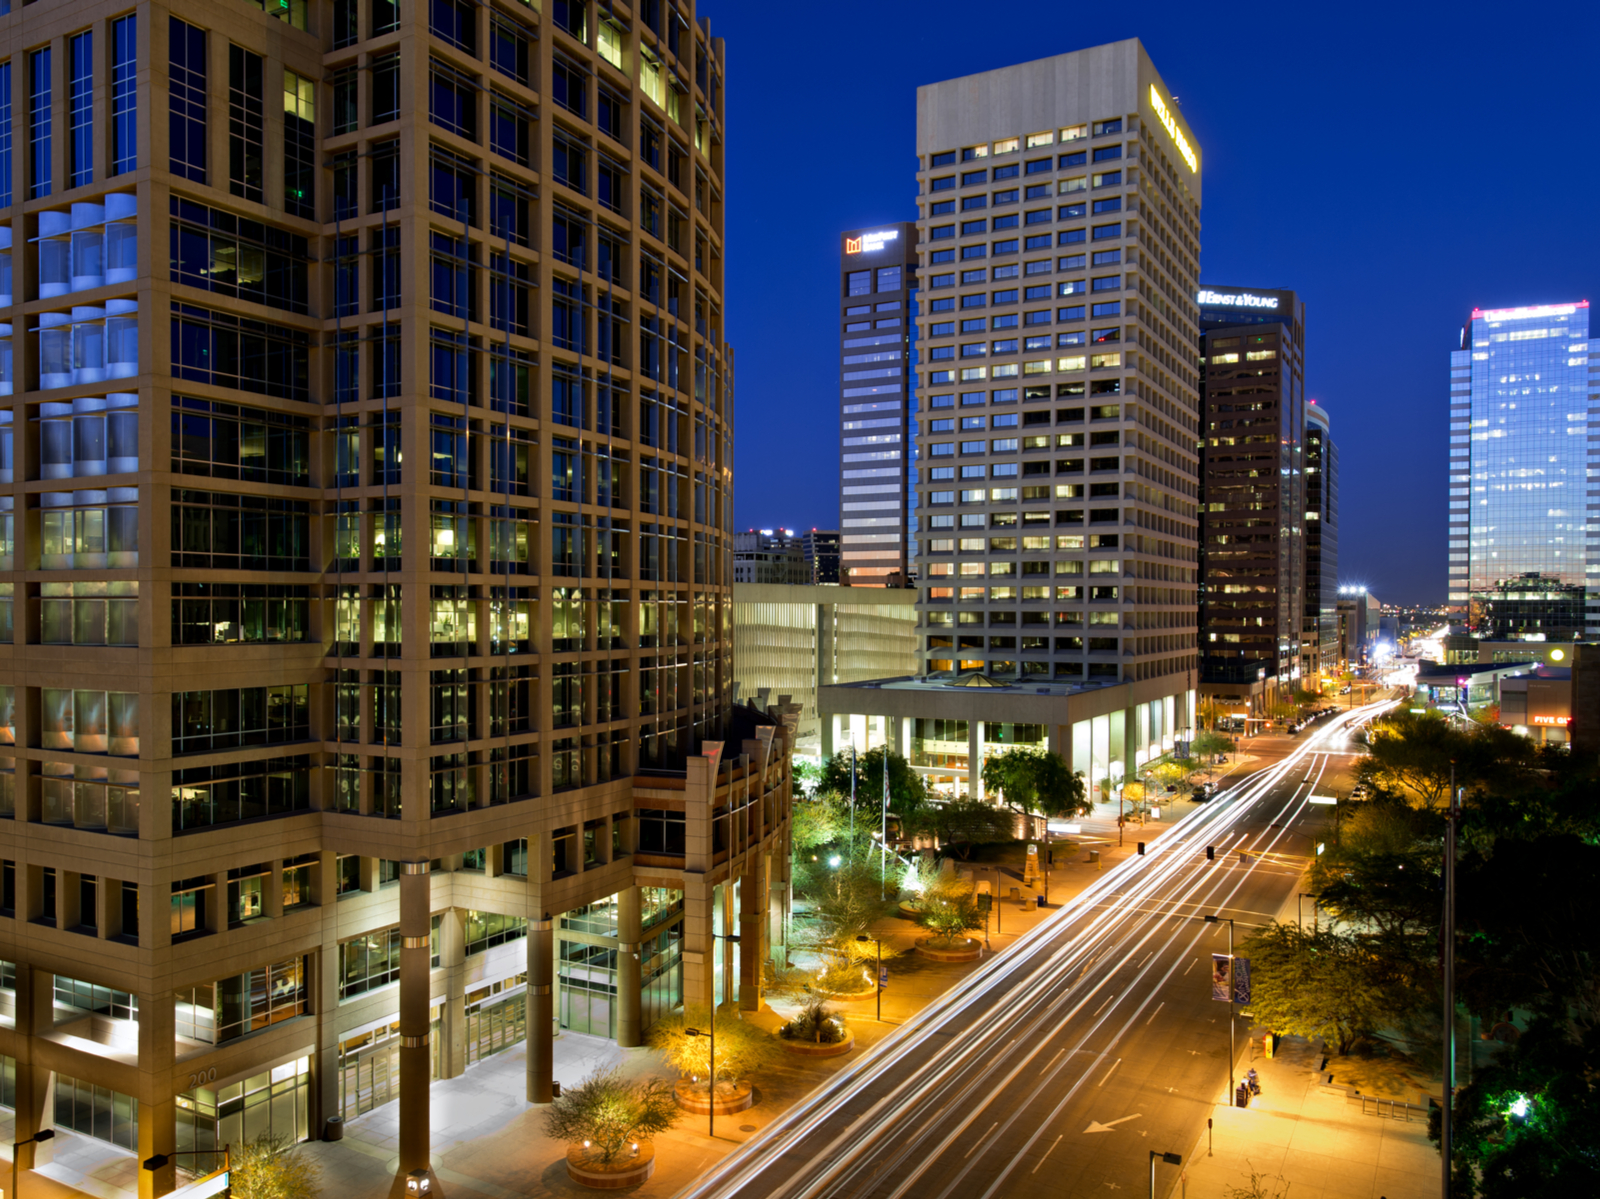 The downtown area pictured at night, one of the best things to do in Phoenix Arizona